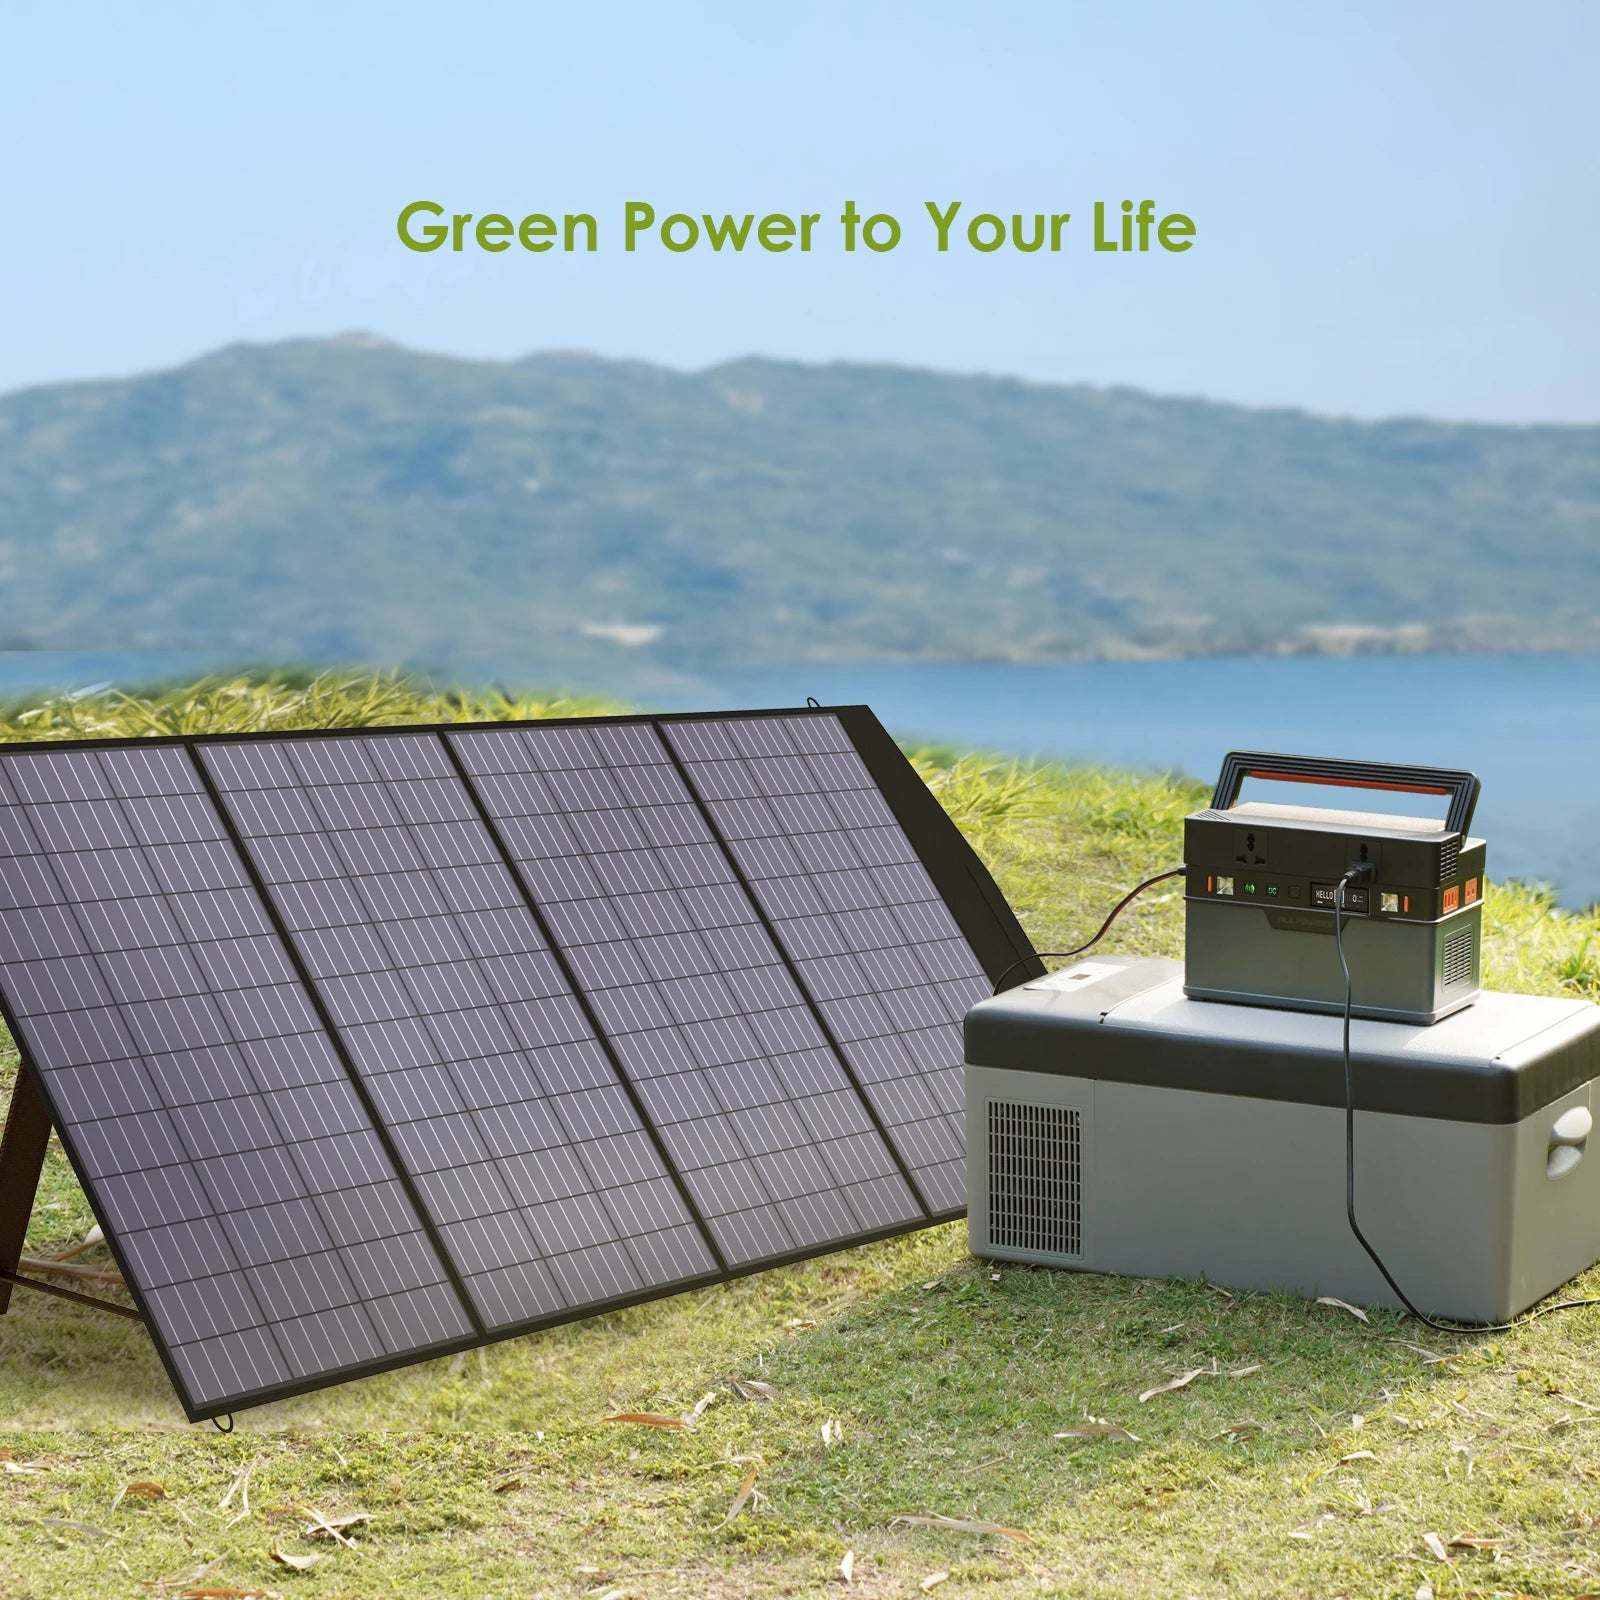 Solar panel kit with foldable panel, adapters, cables, and manual, backed by 18-month warranty and customer support.